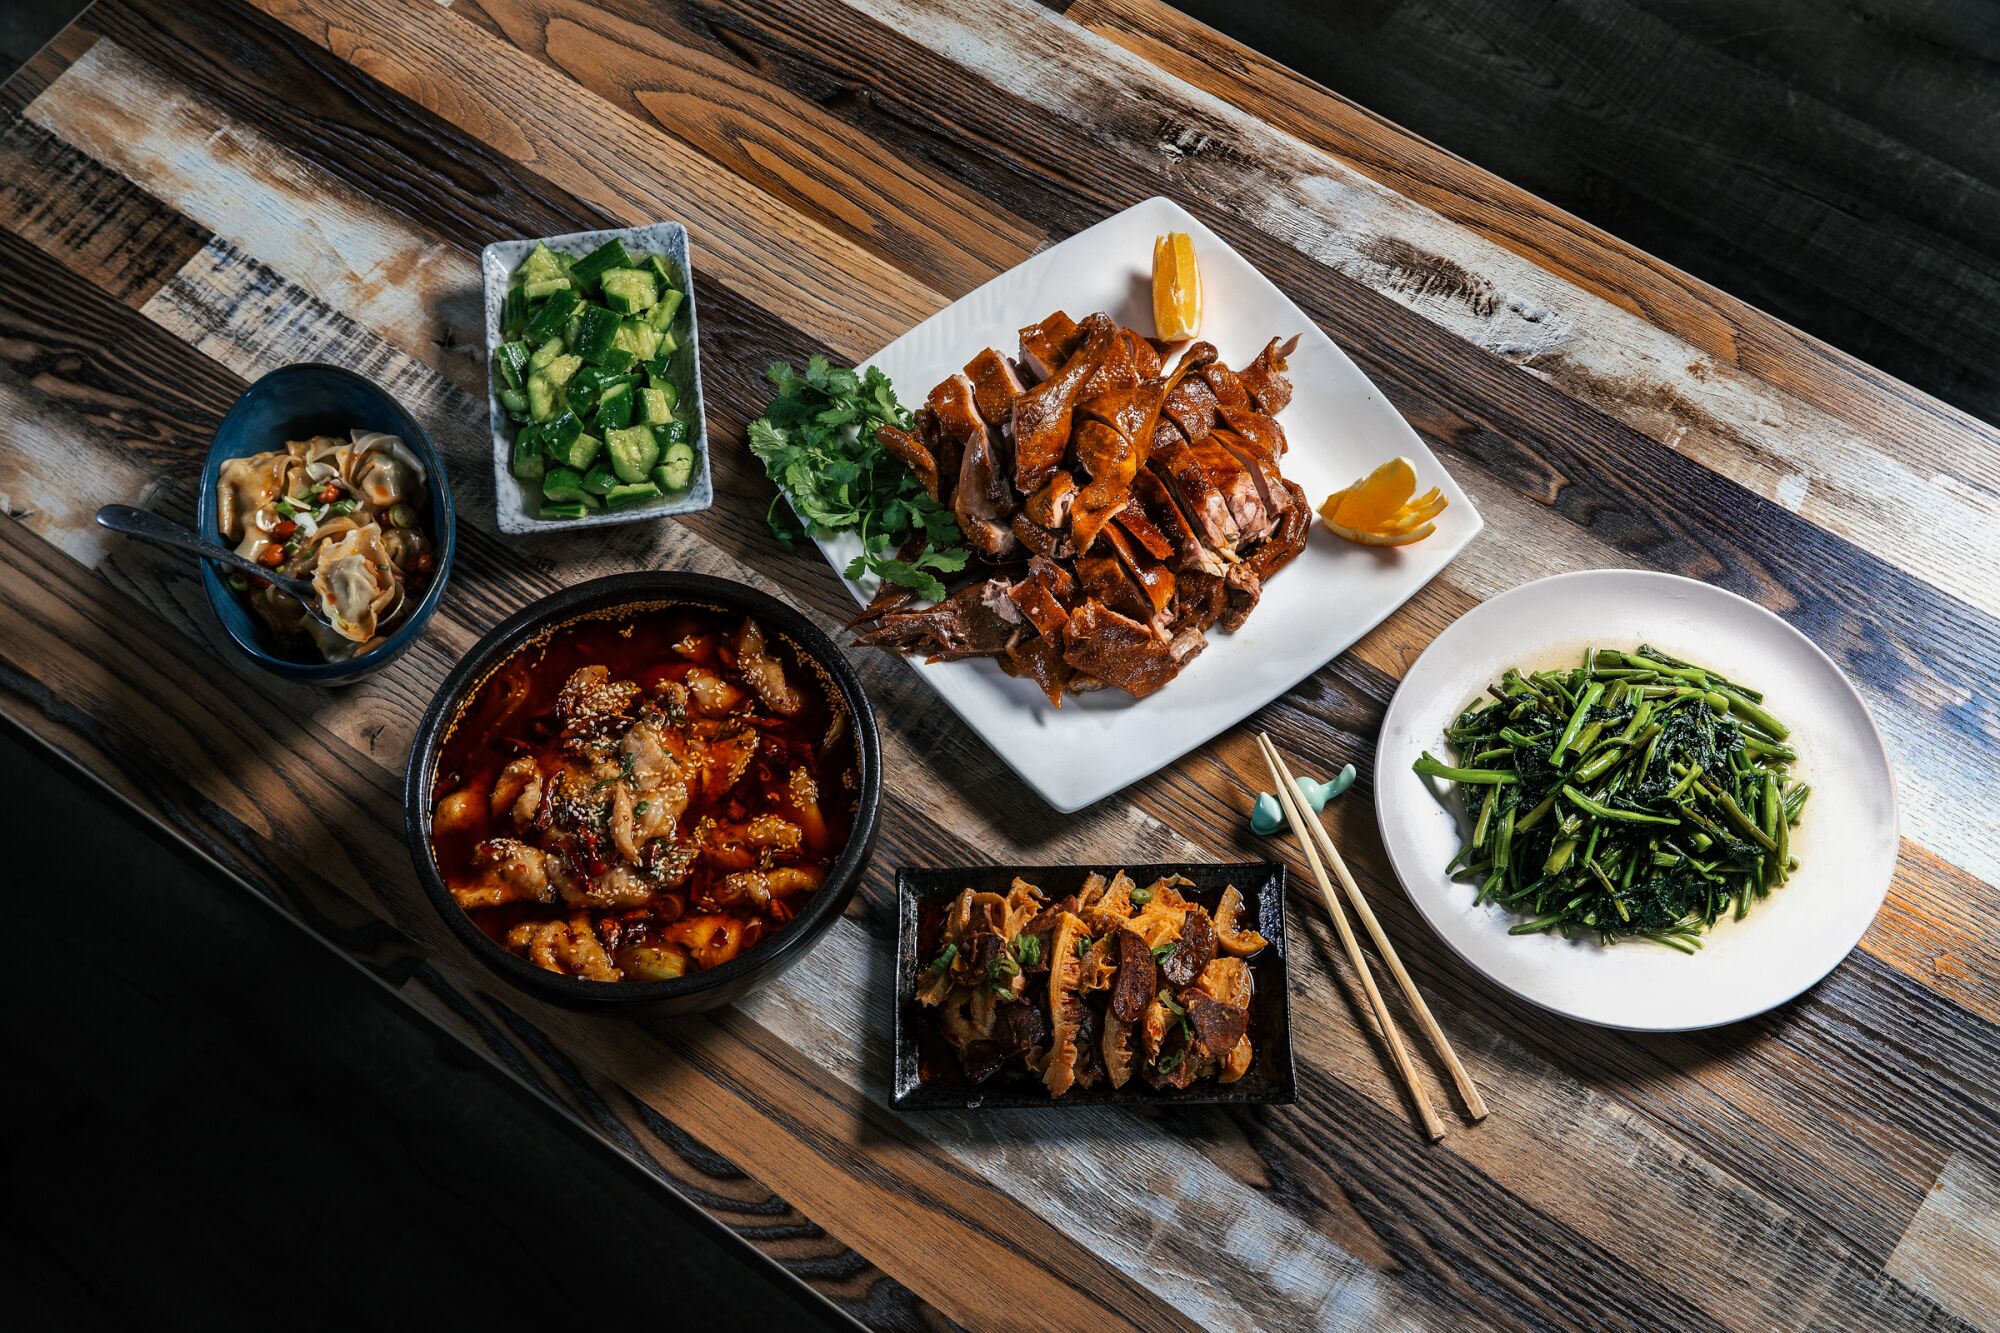 Overhead view of six dishes on a table with chopsticks